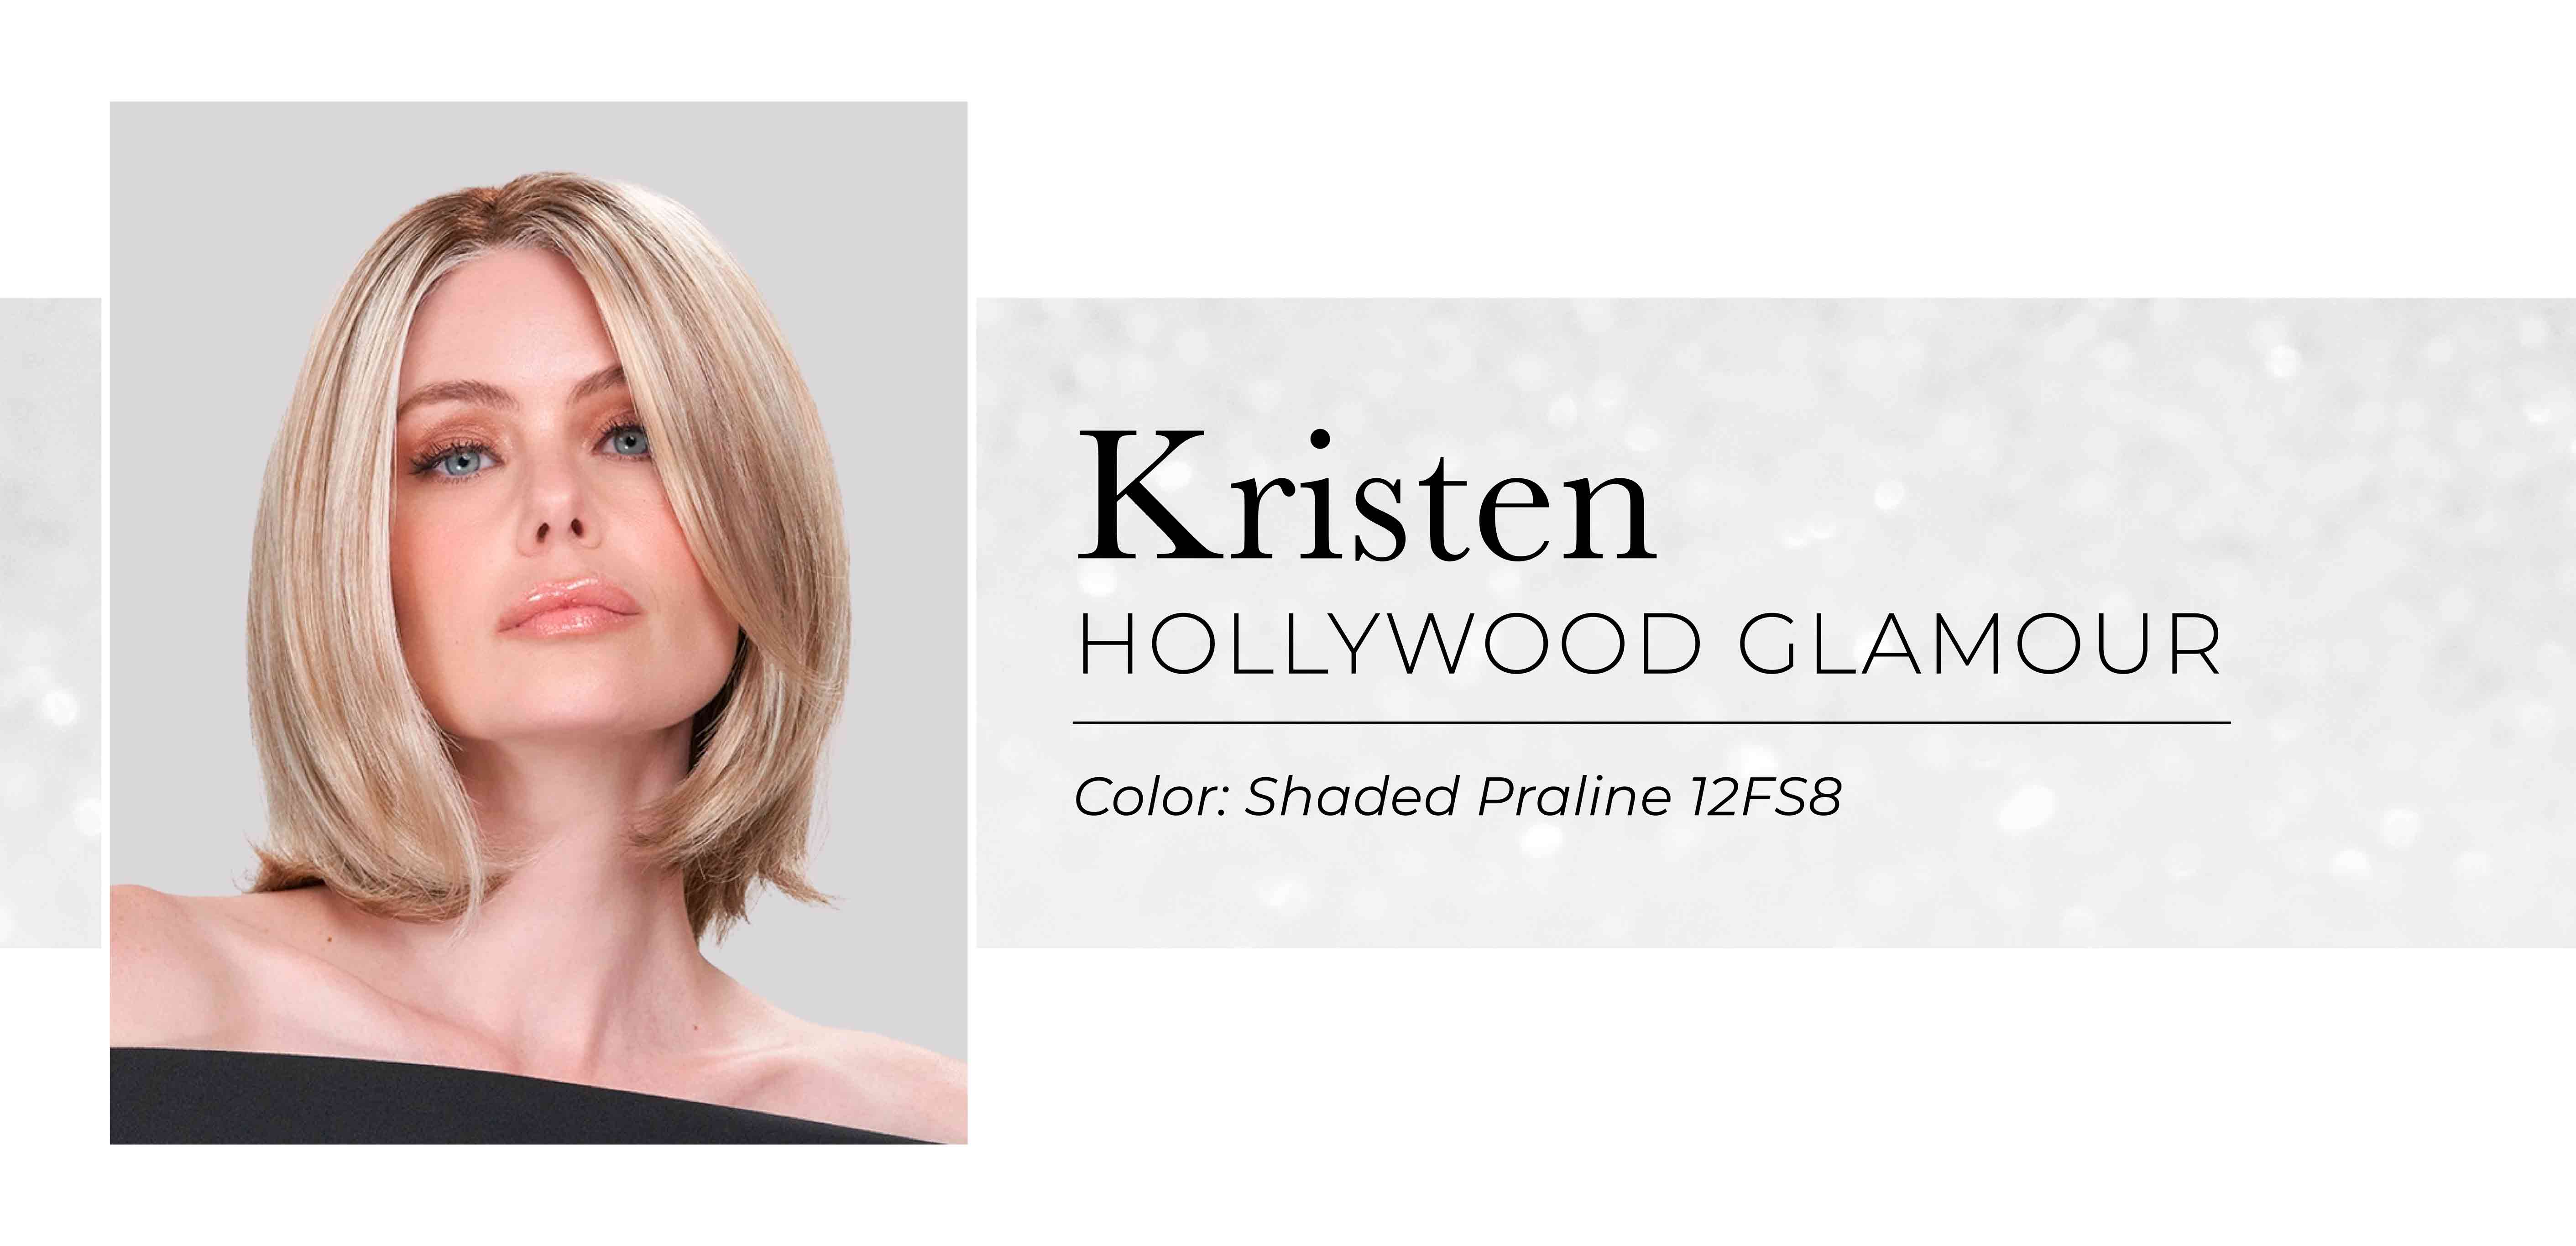 Kristen: Hollywood Glamour synthetic wig